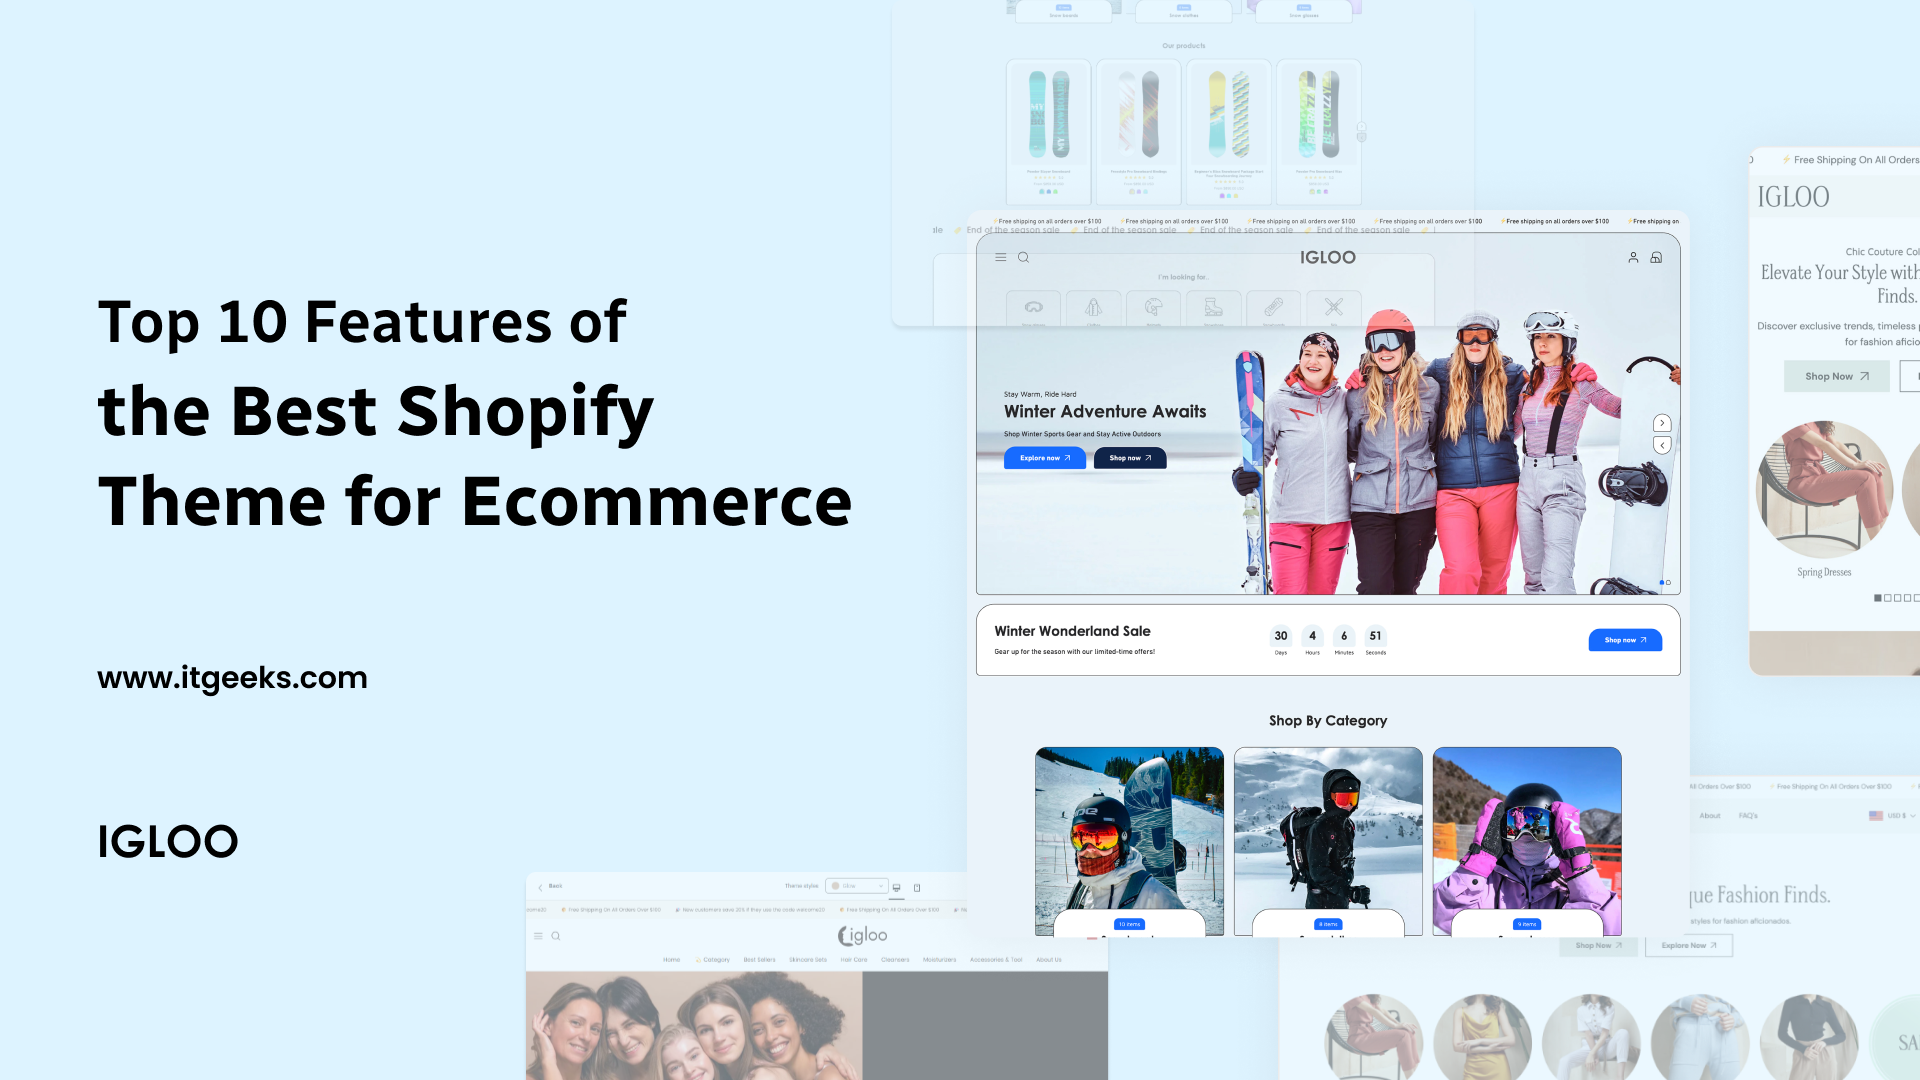 Top 10 Features of the Best Shopify Theme for Ecommerce